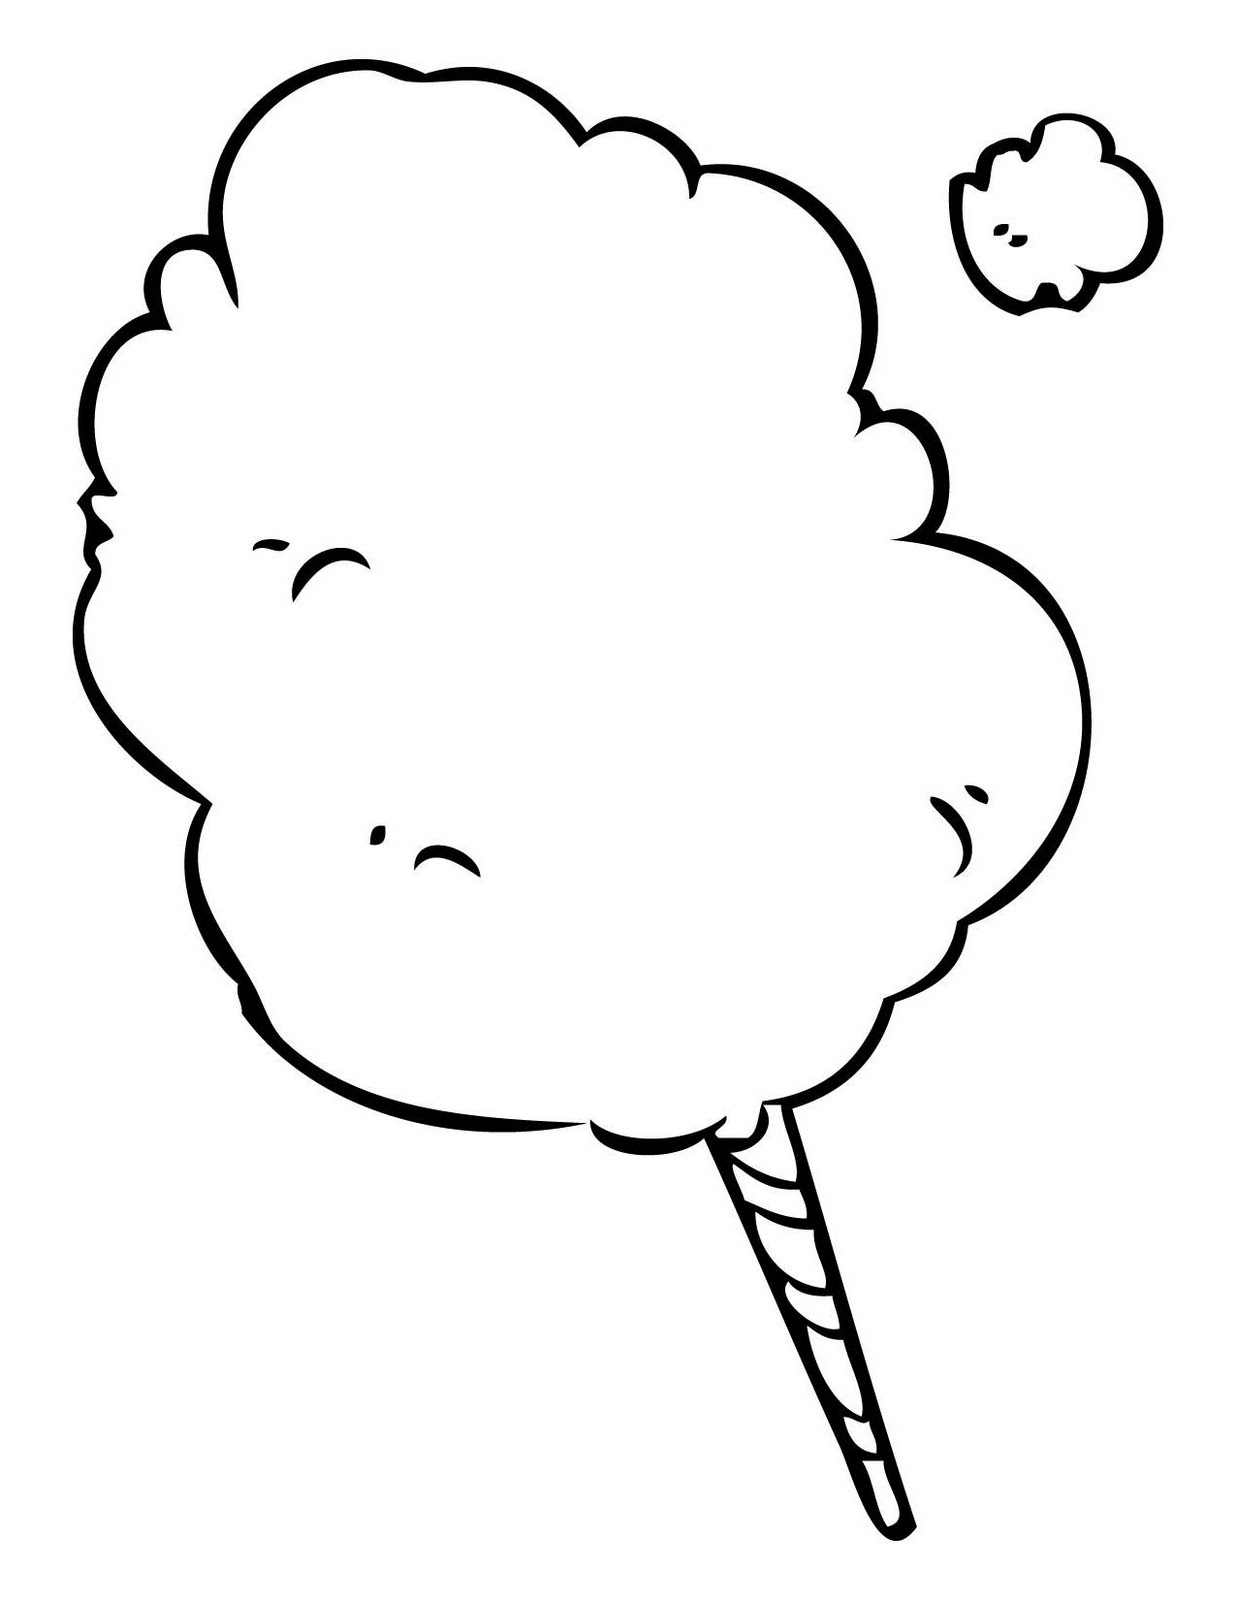 Cotton candy clipart free download clip art on 4